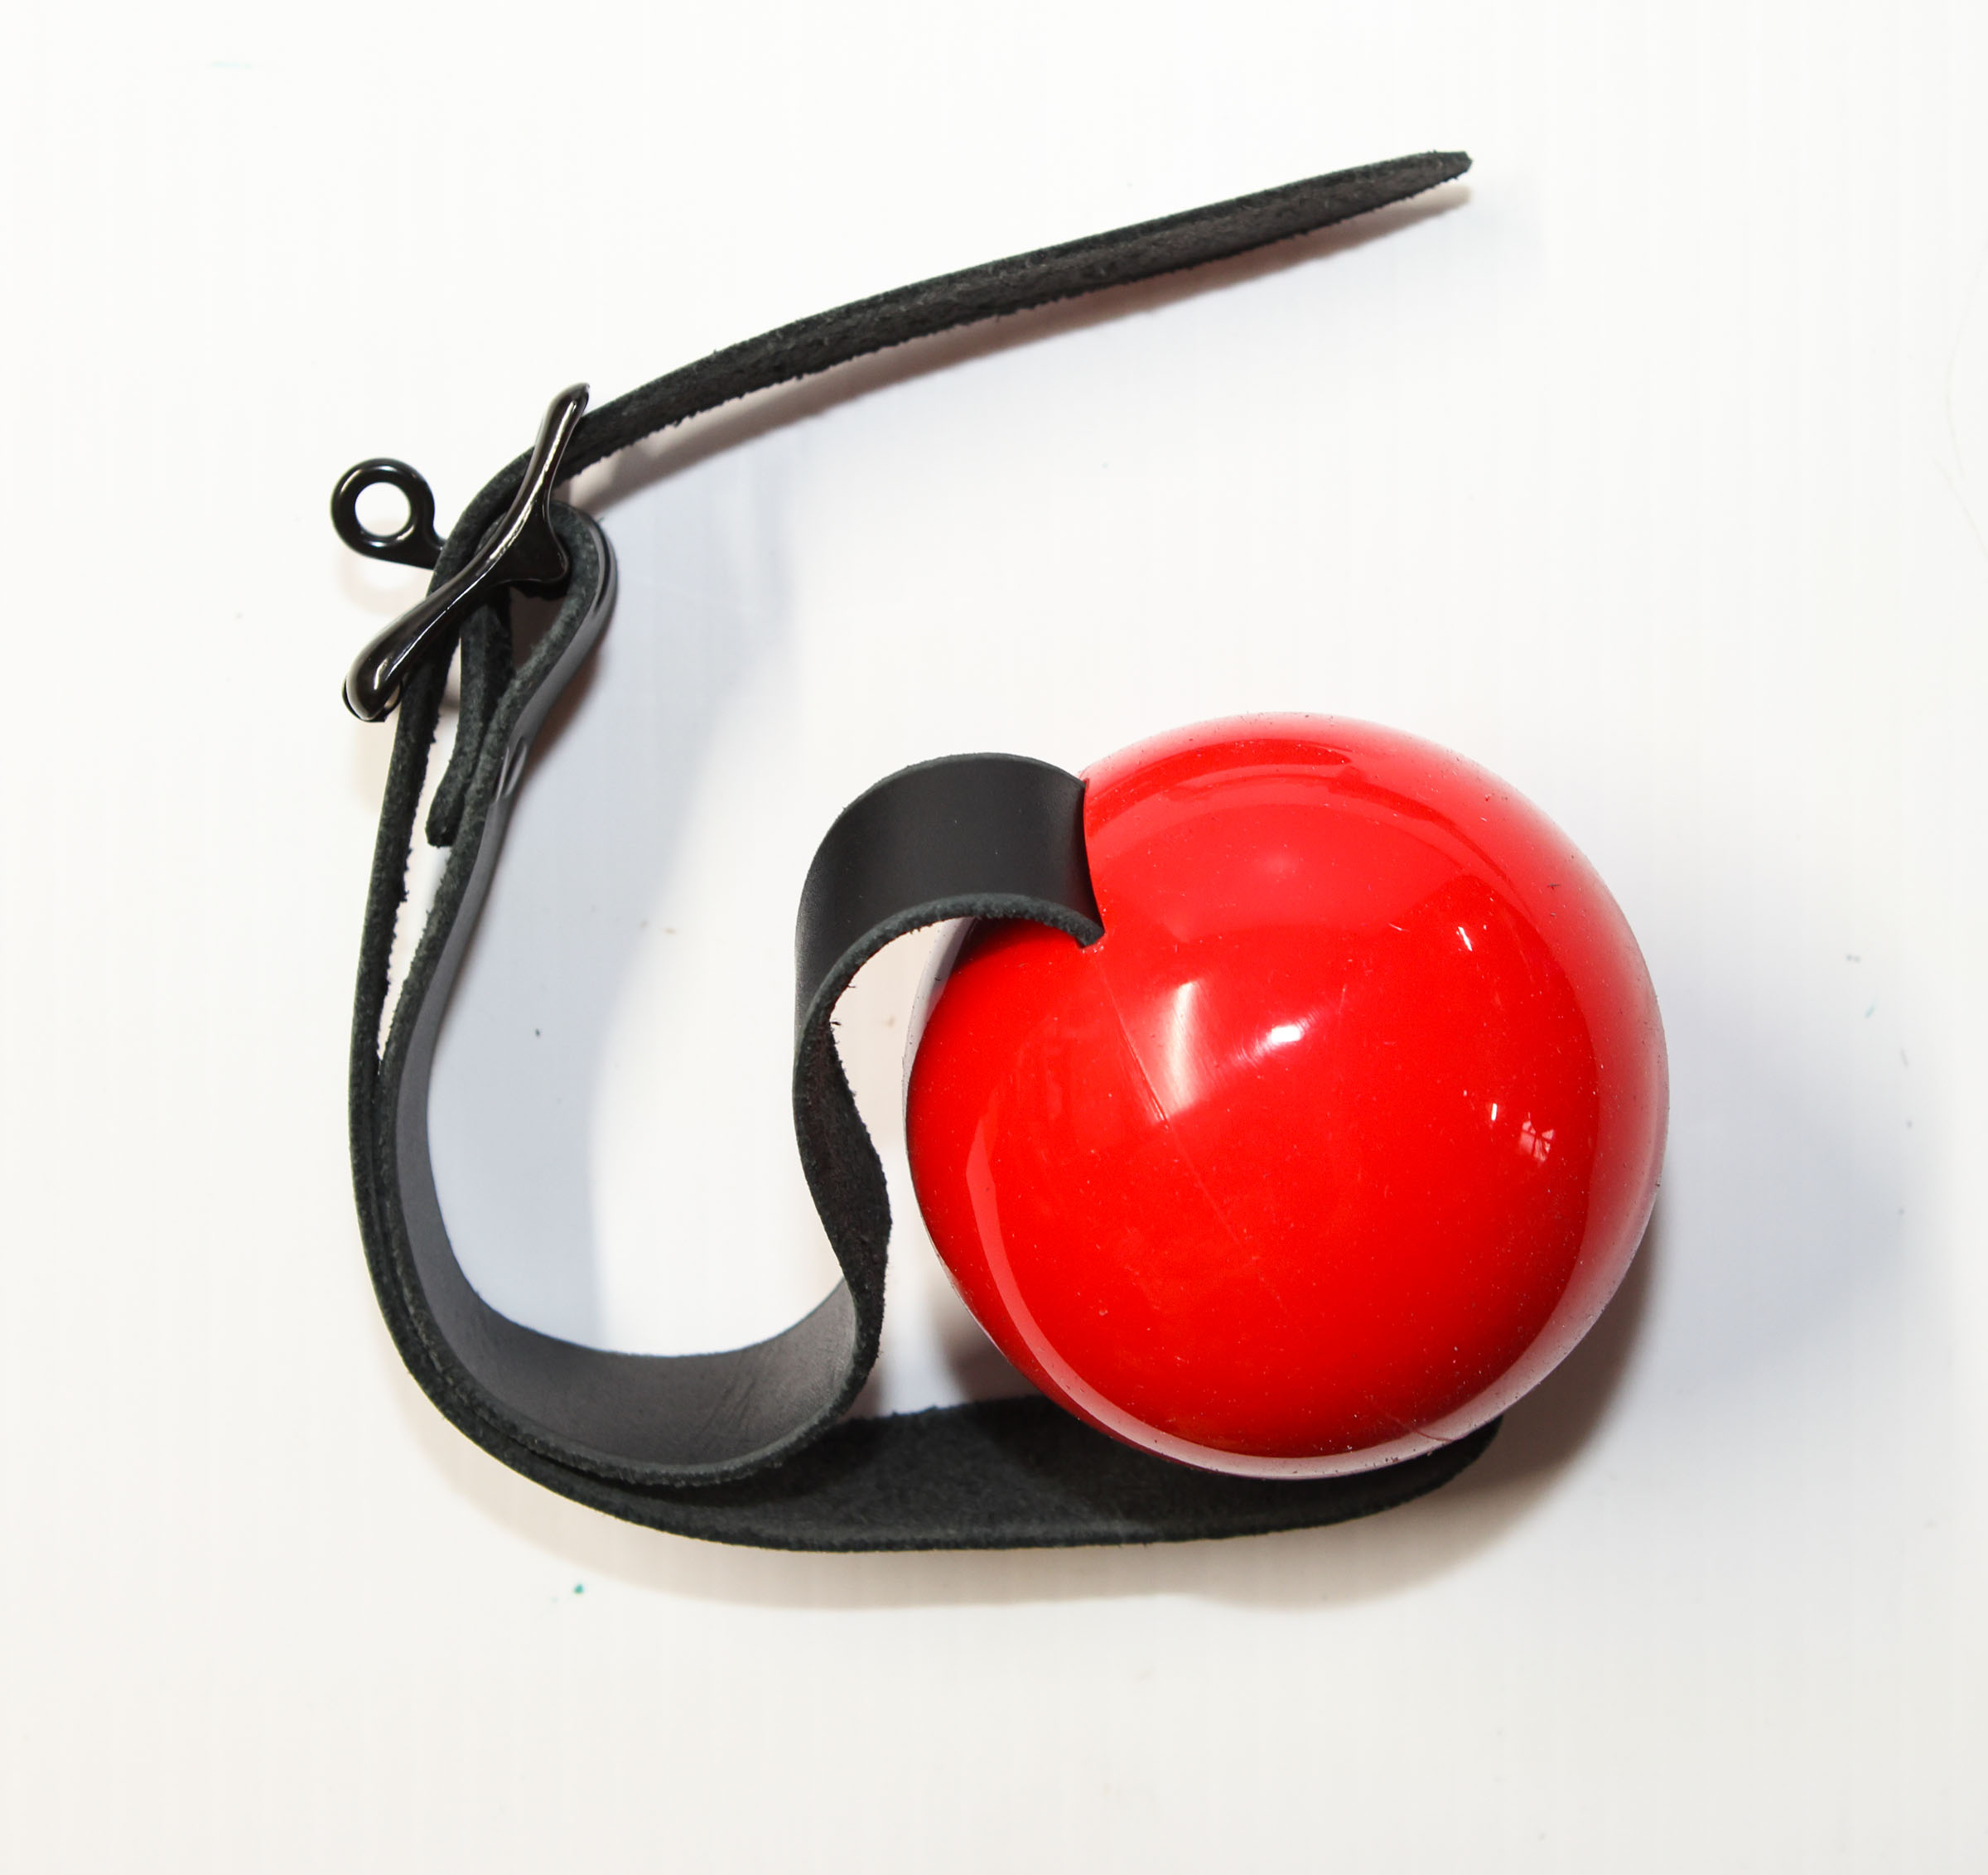 Goddess/WTF sized 3.0" (76.2mm) Ball Gag, Medical Grade silicone material, for Adults photo